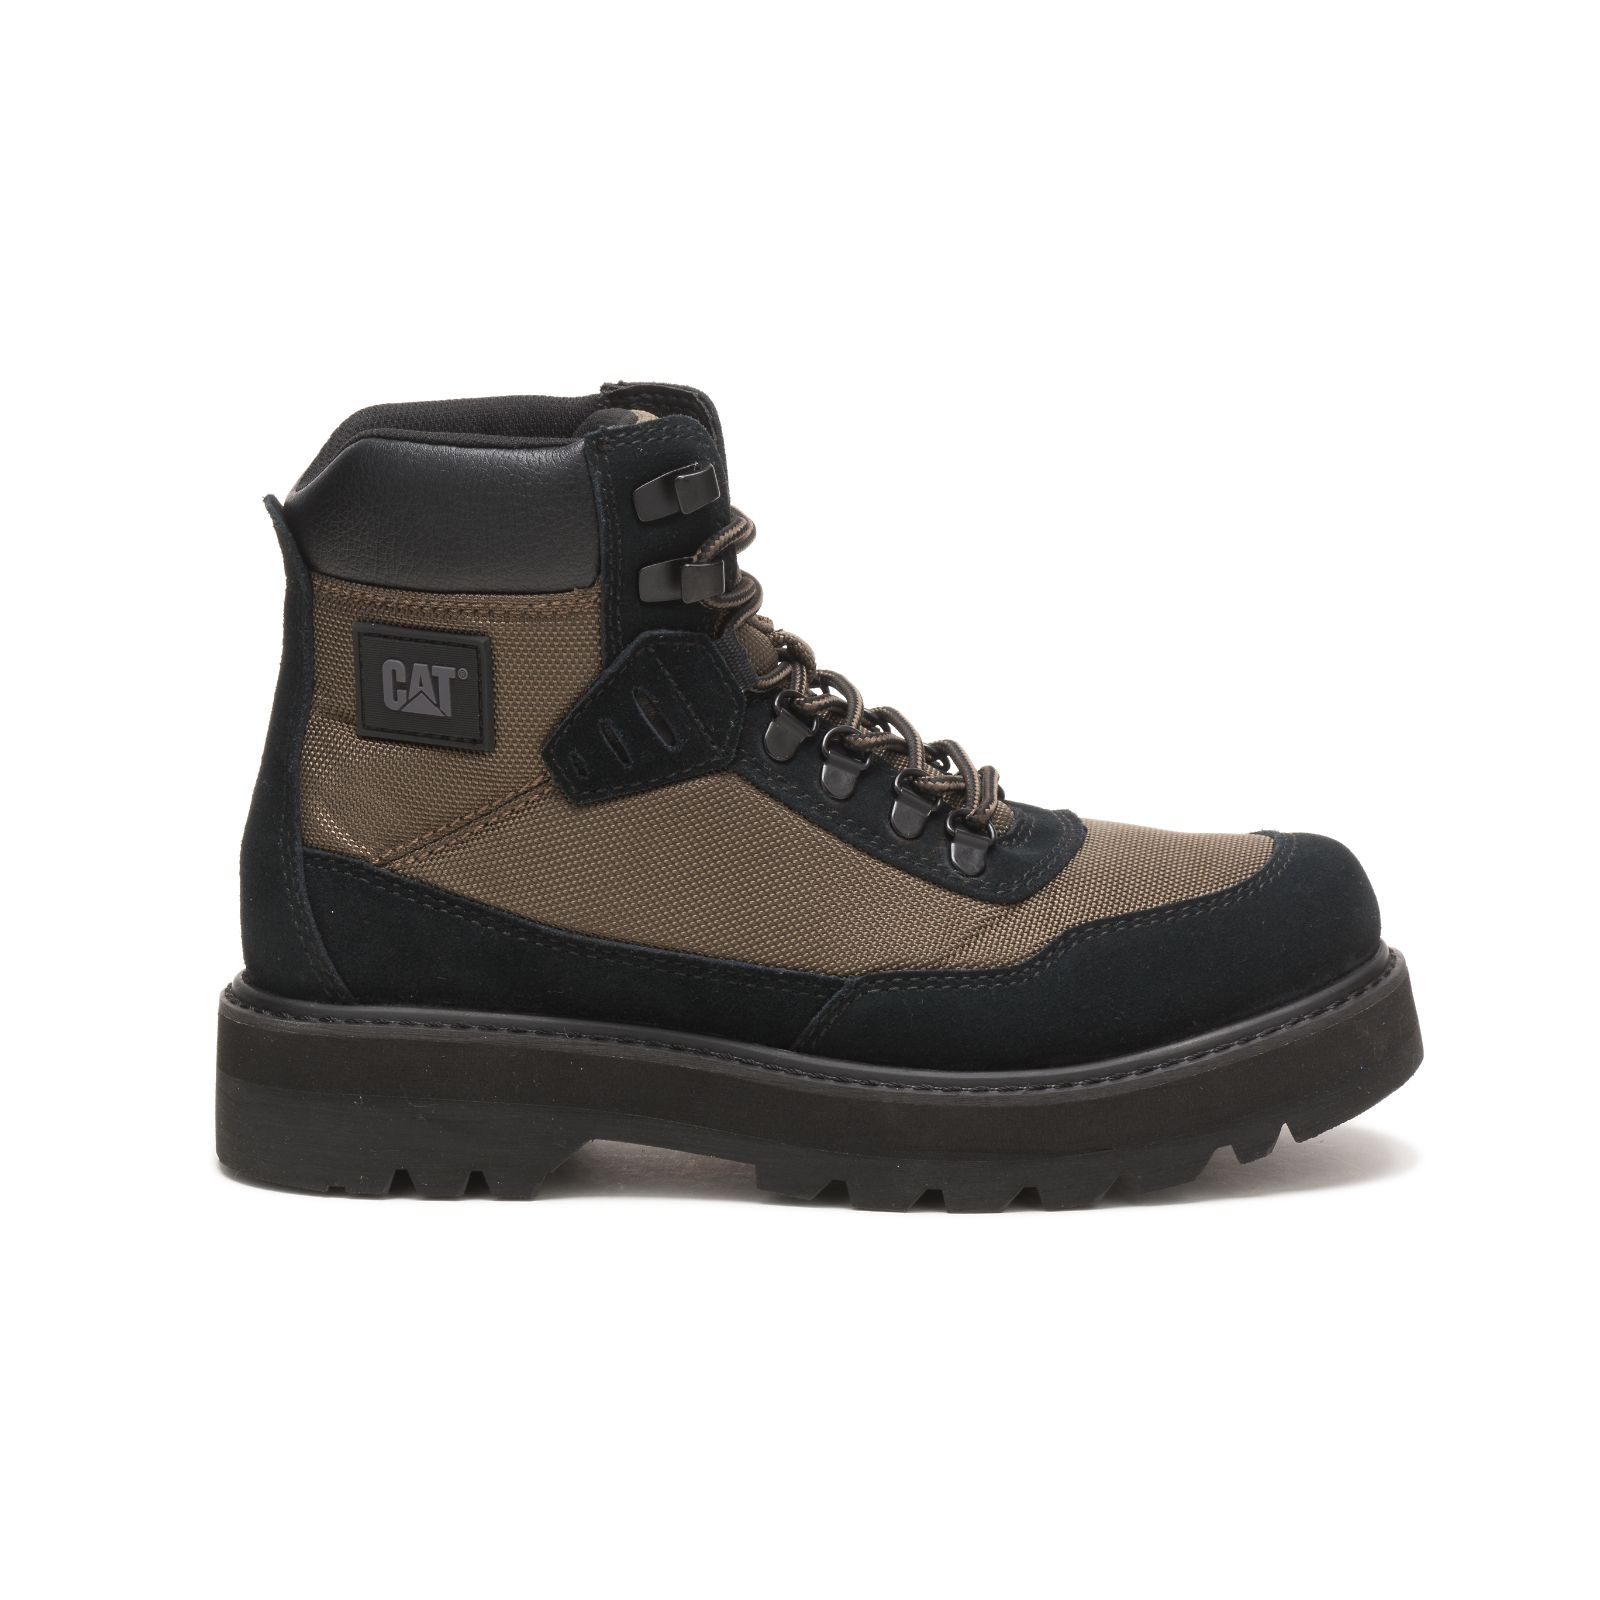 Caterpillar Boots Lahore - Caterpillar Conquer 2.0 Womens Casual Boots Dark Olive/Black (096432-YRA)